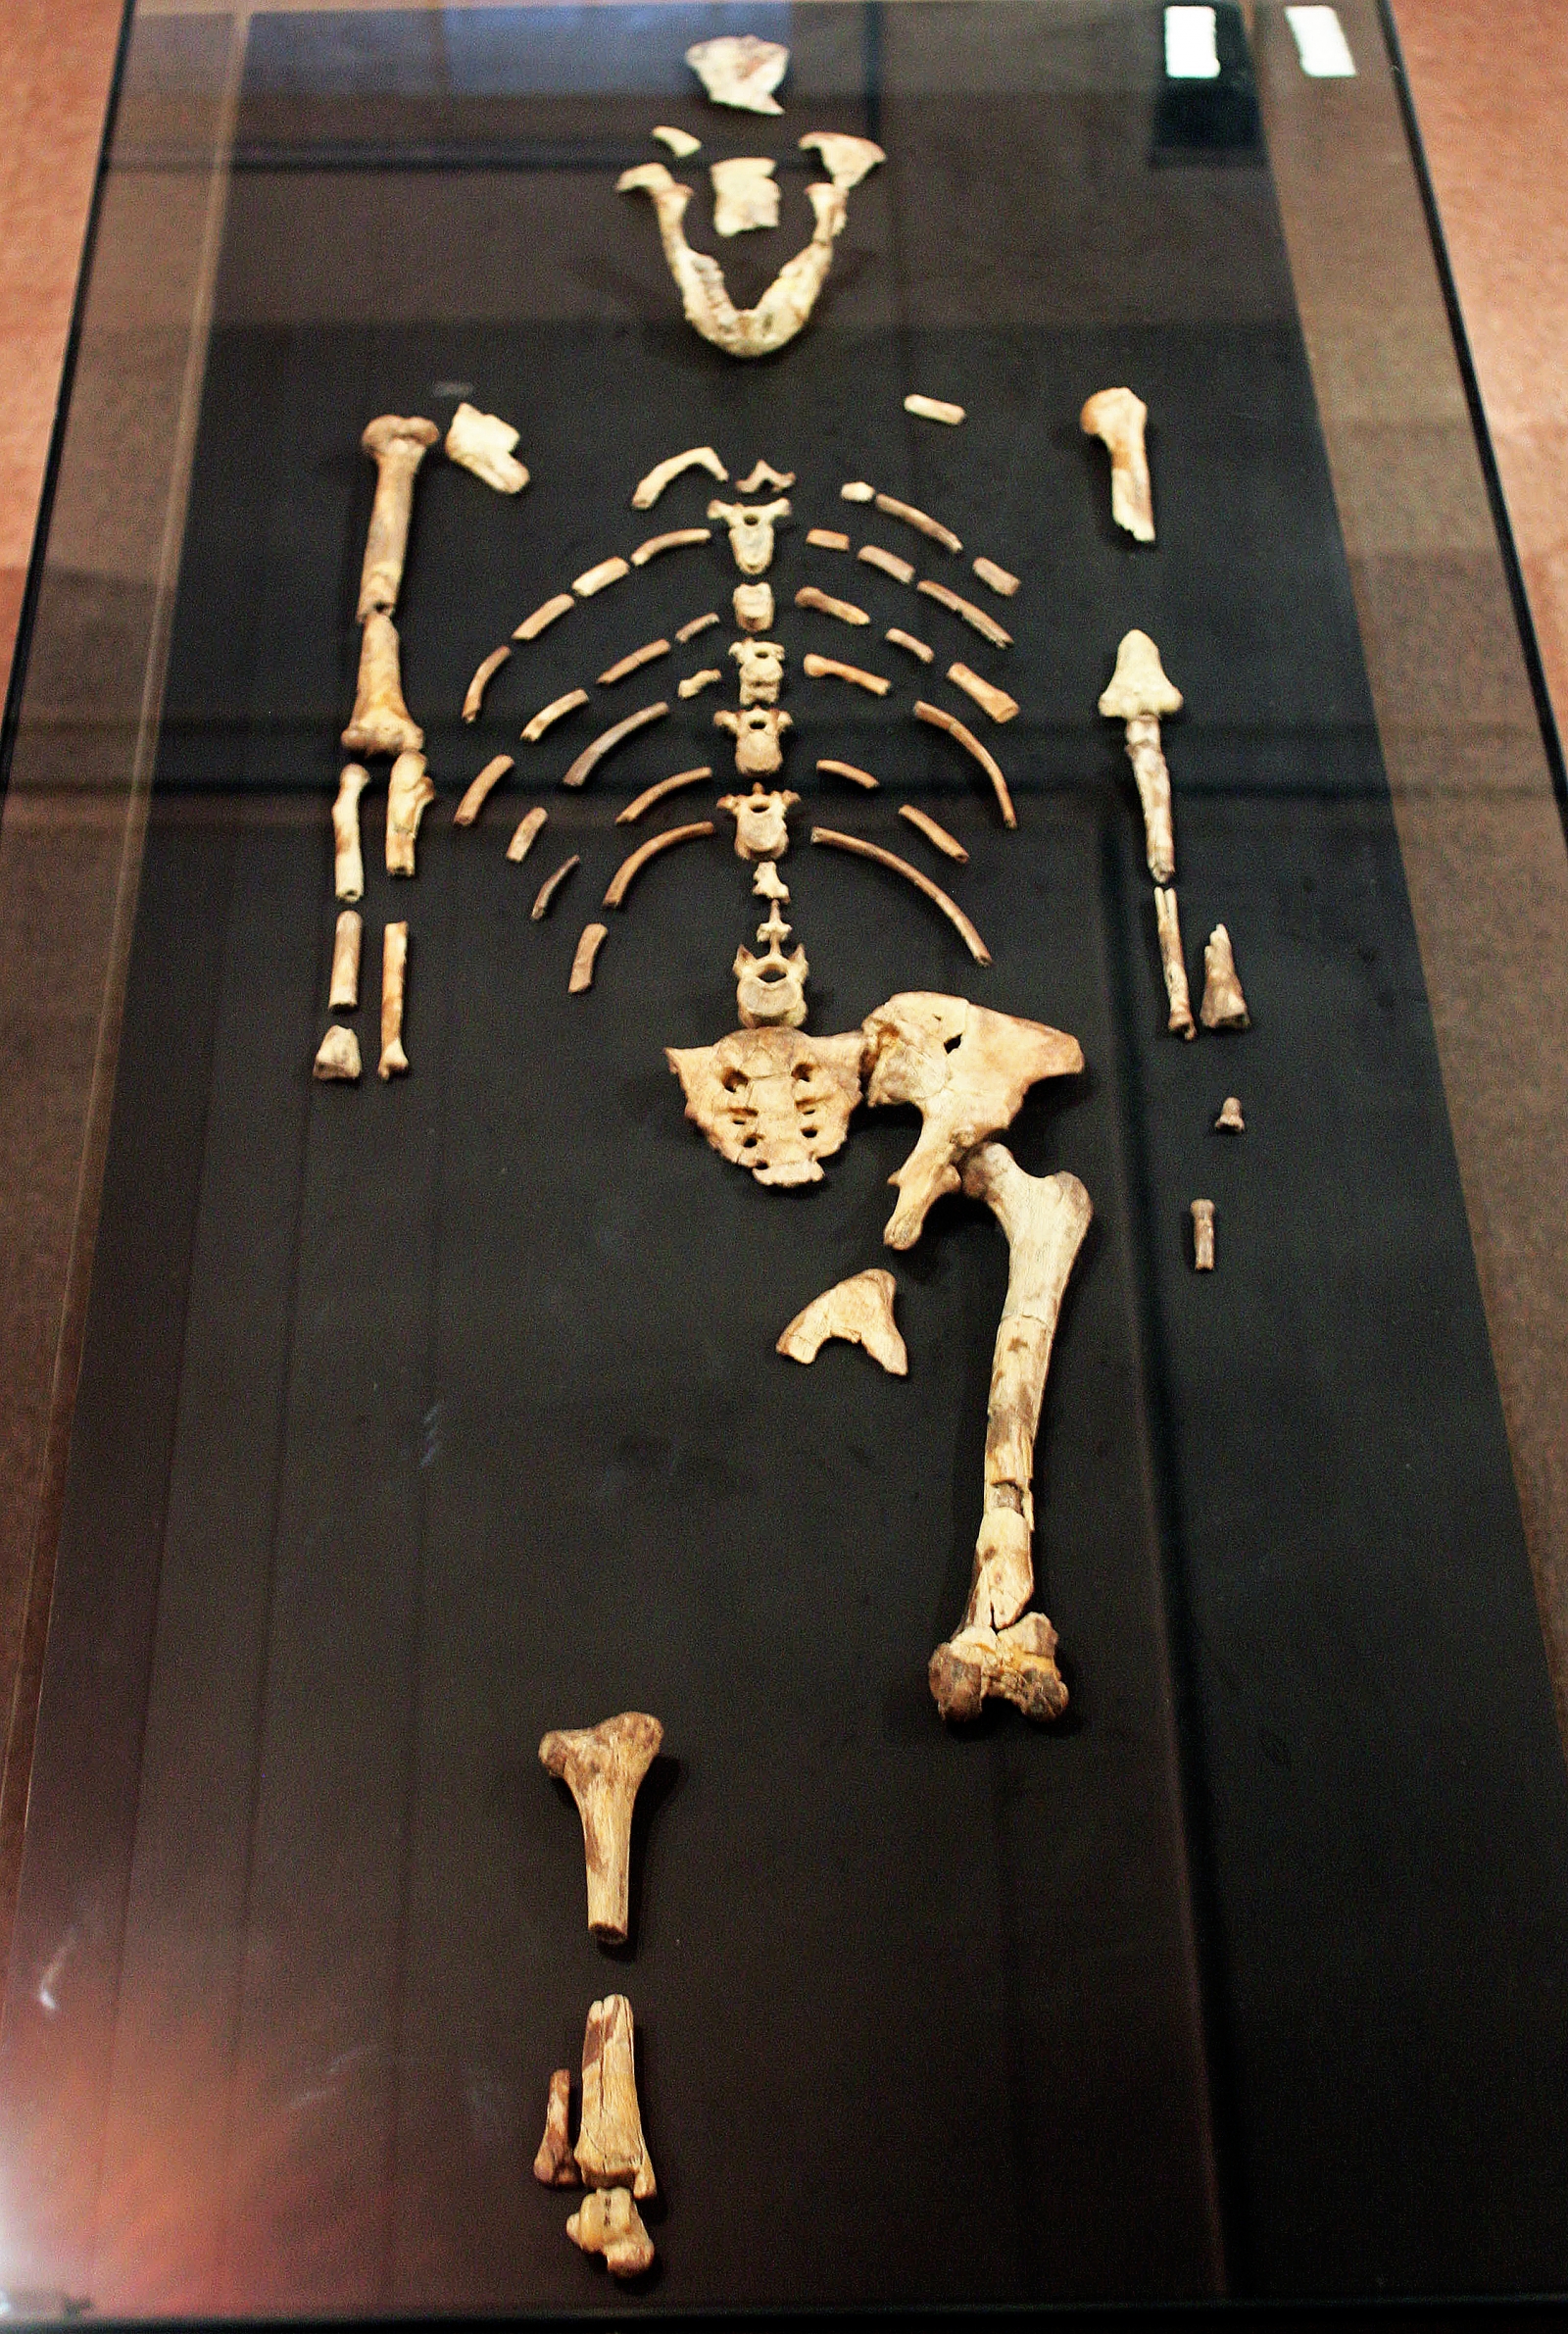 Lucy the Australopithecus, one of our oldestfound human ancestor